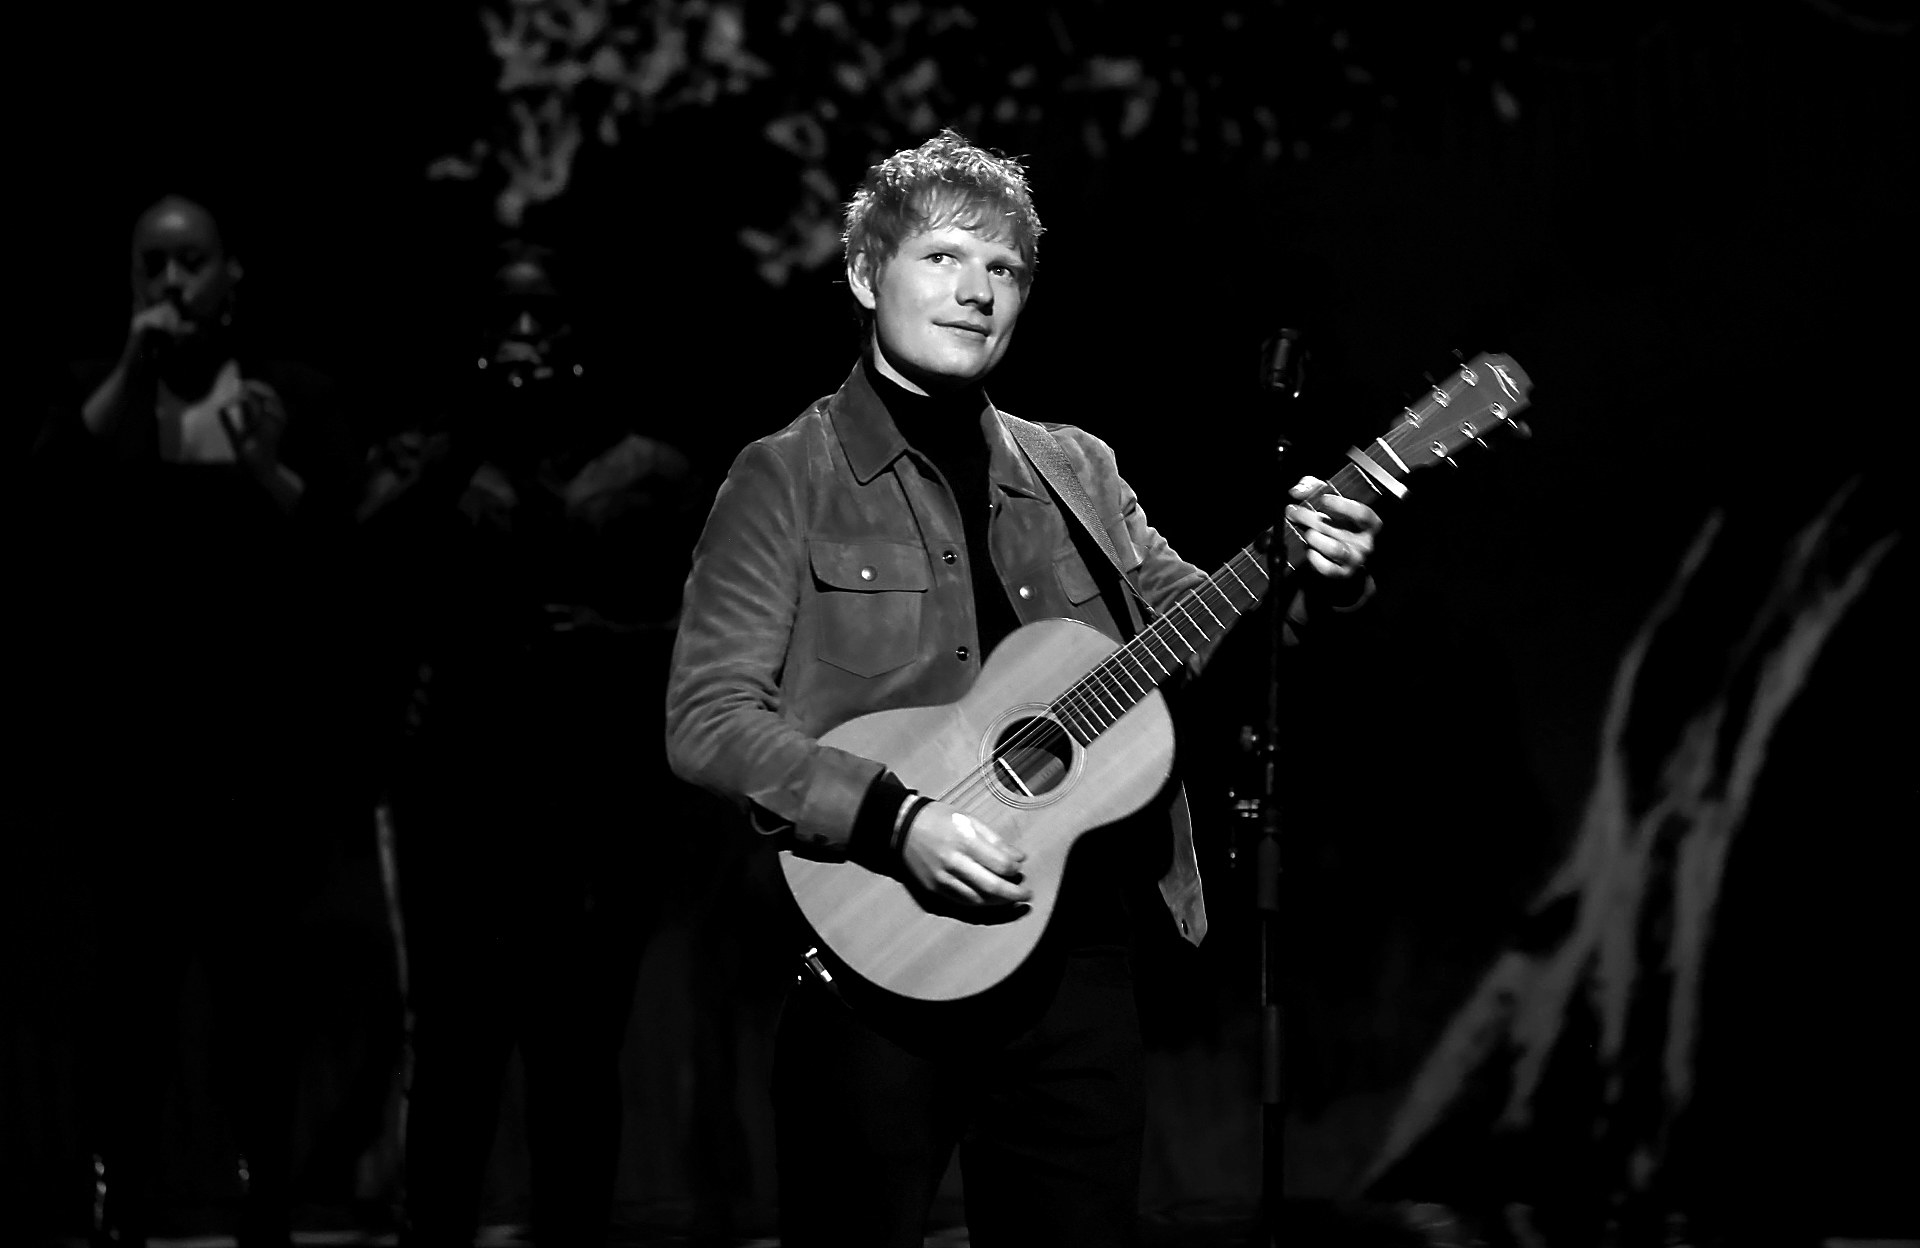 Ed Sheeran performs on stage during the Earthshot Prize 2021 at Alexandra Palace